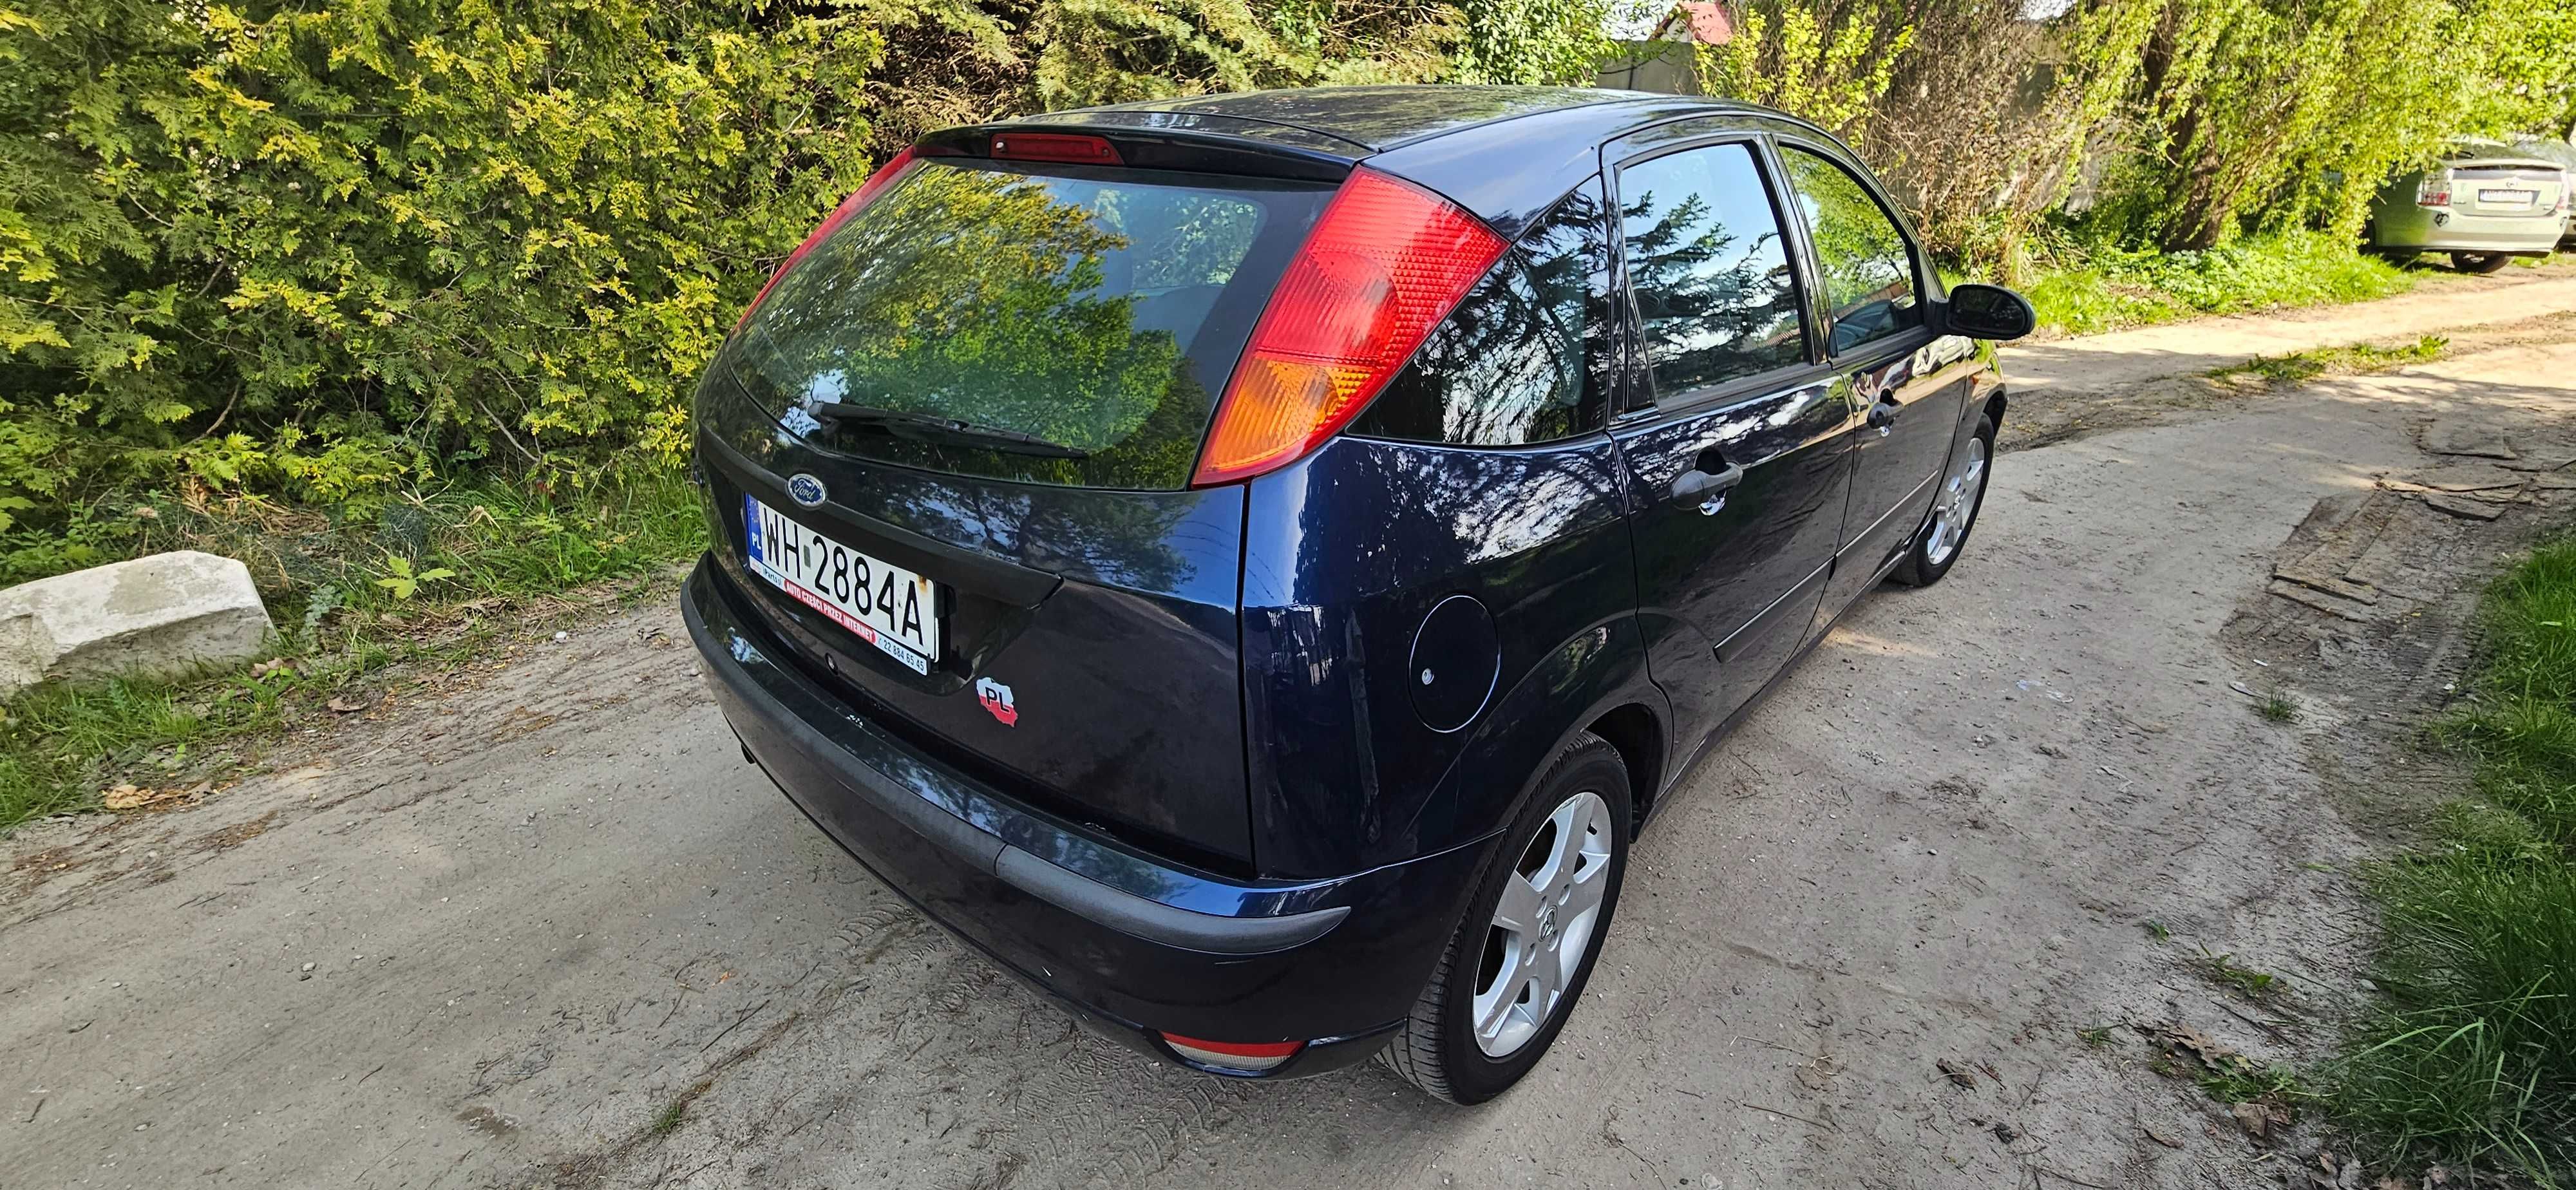 Ford focus 1.6 benzyna